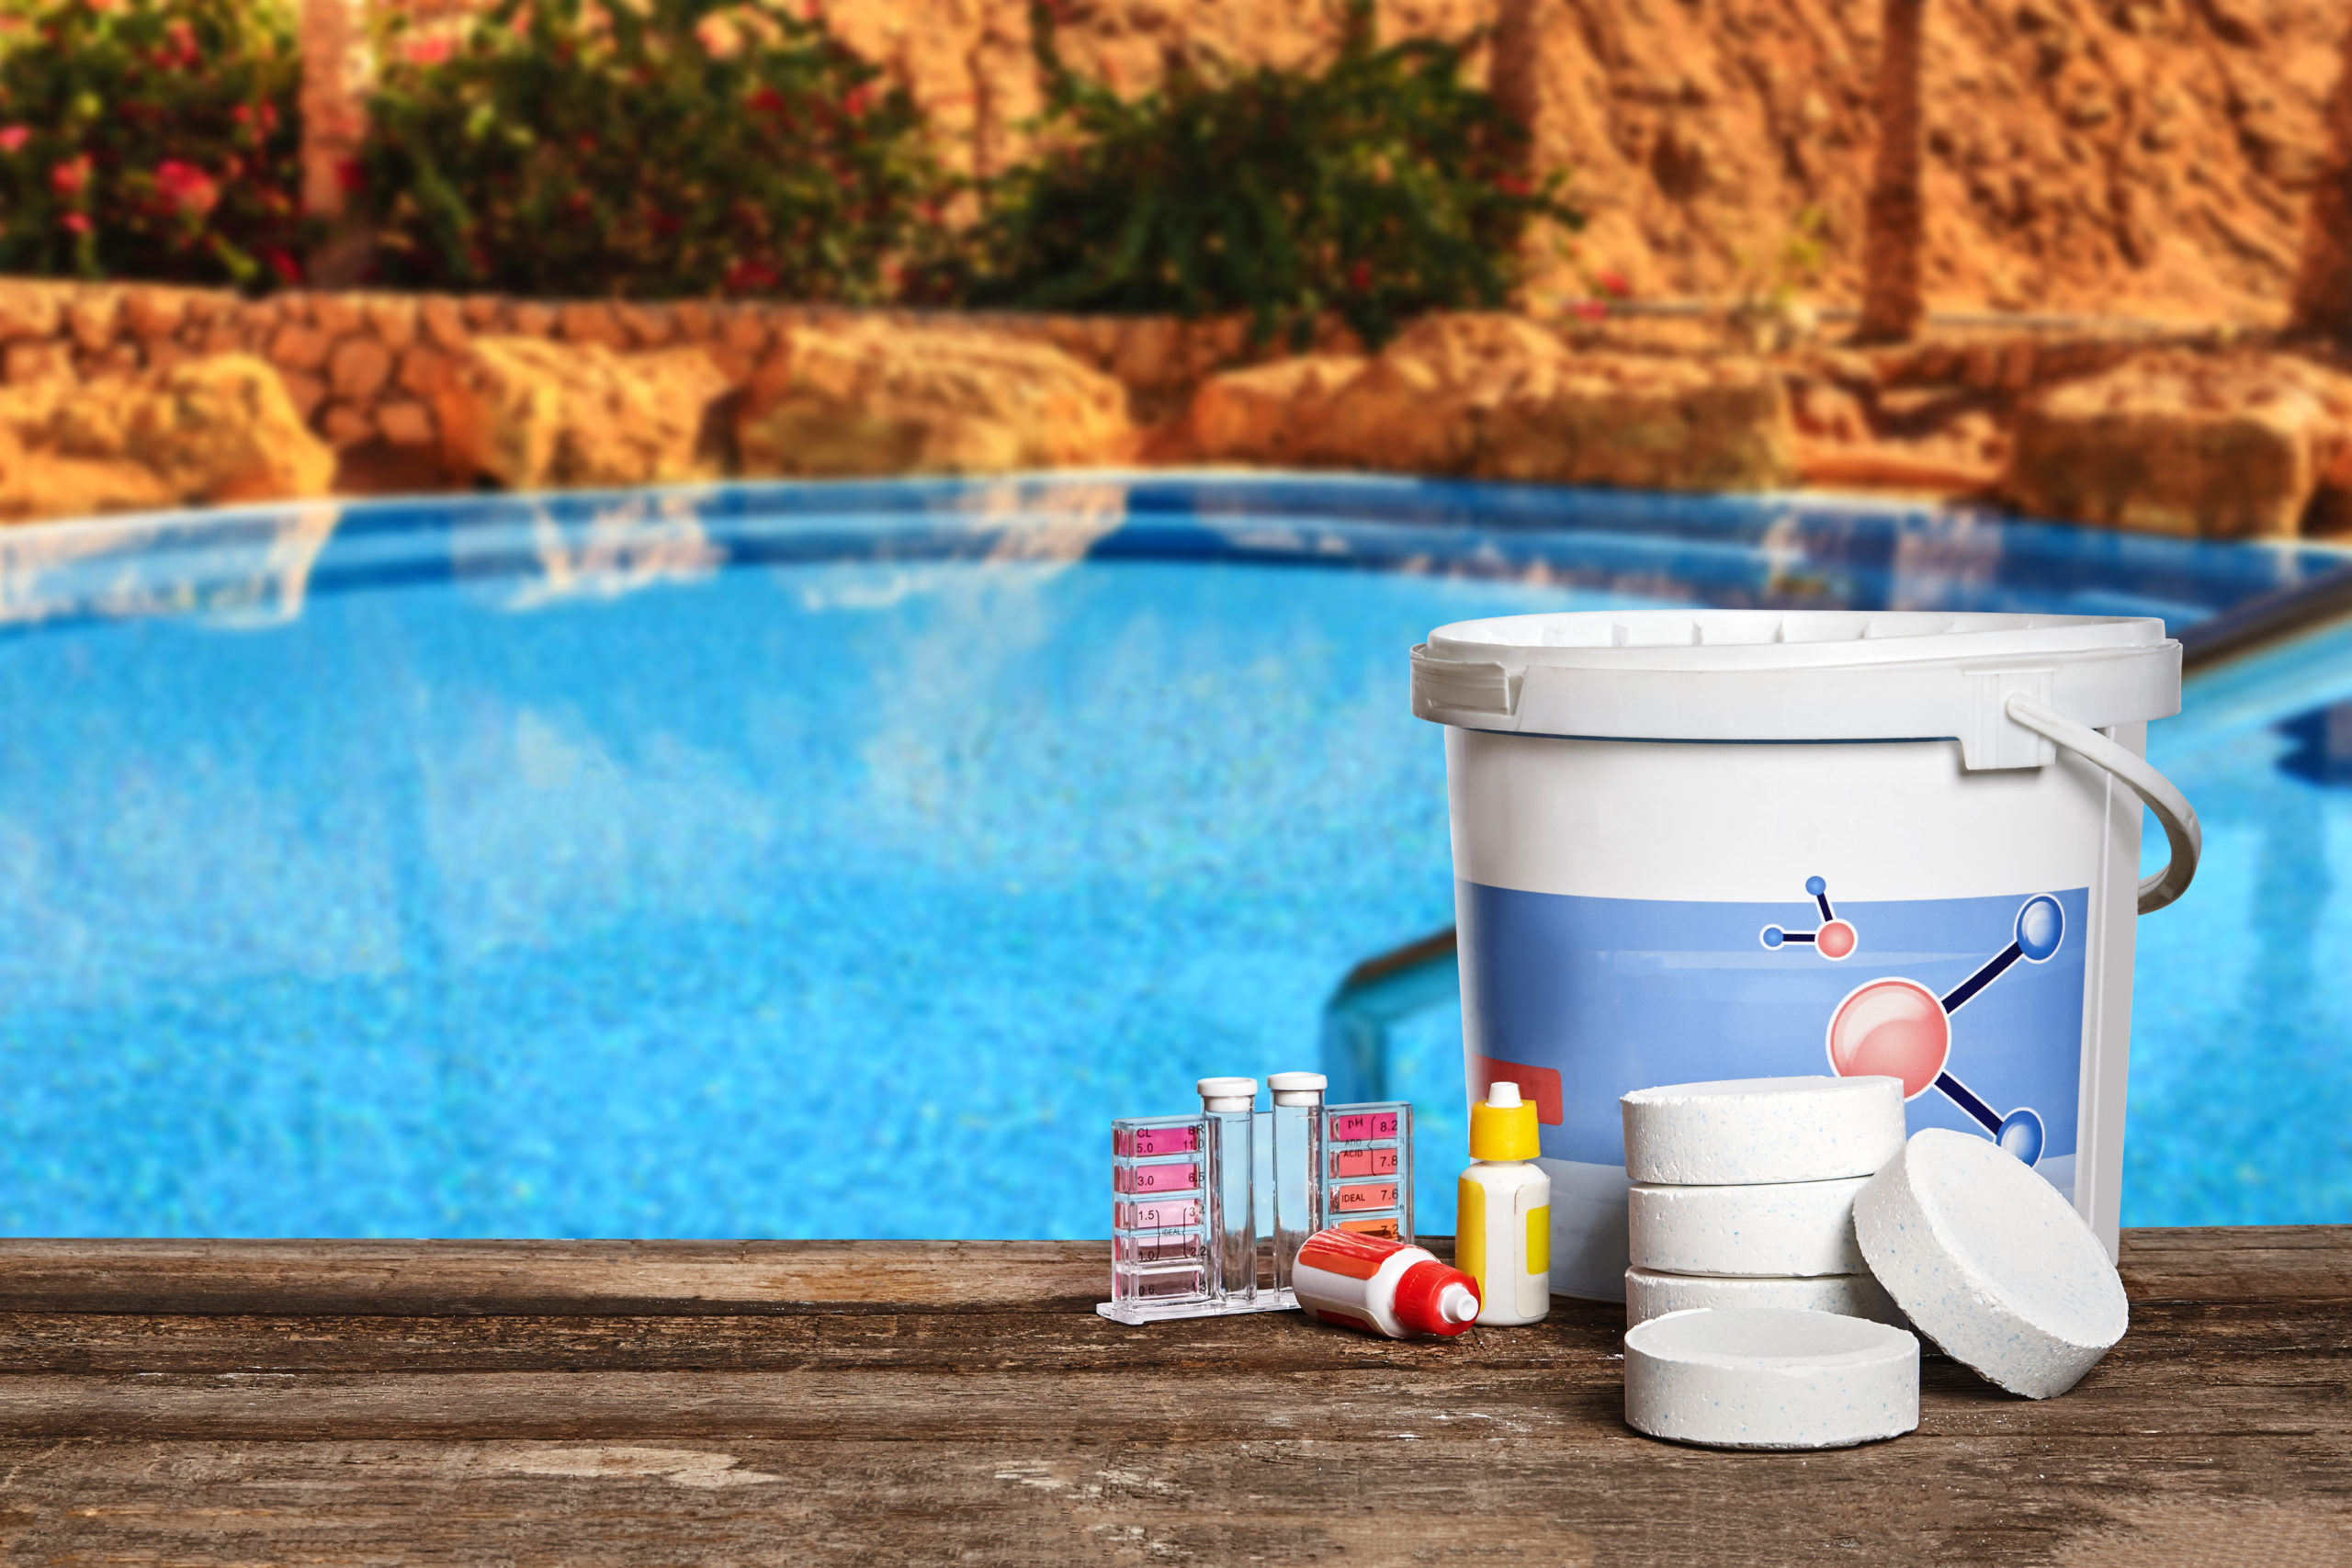 Various cleaning materials and tools used for pool maintenance, including brushes, skimmers, vacuum equipment, and chemicals